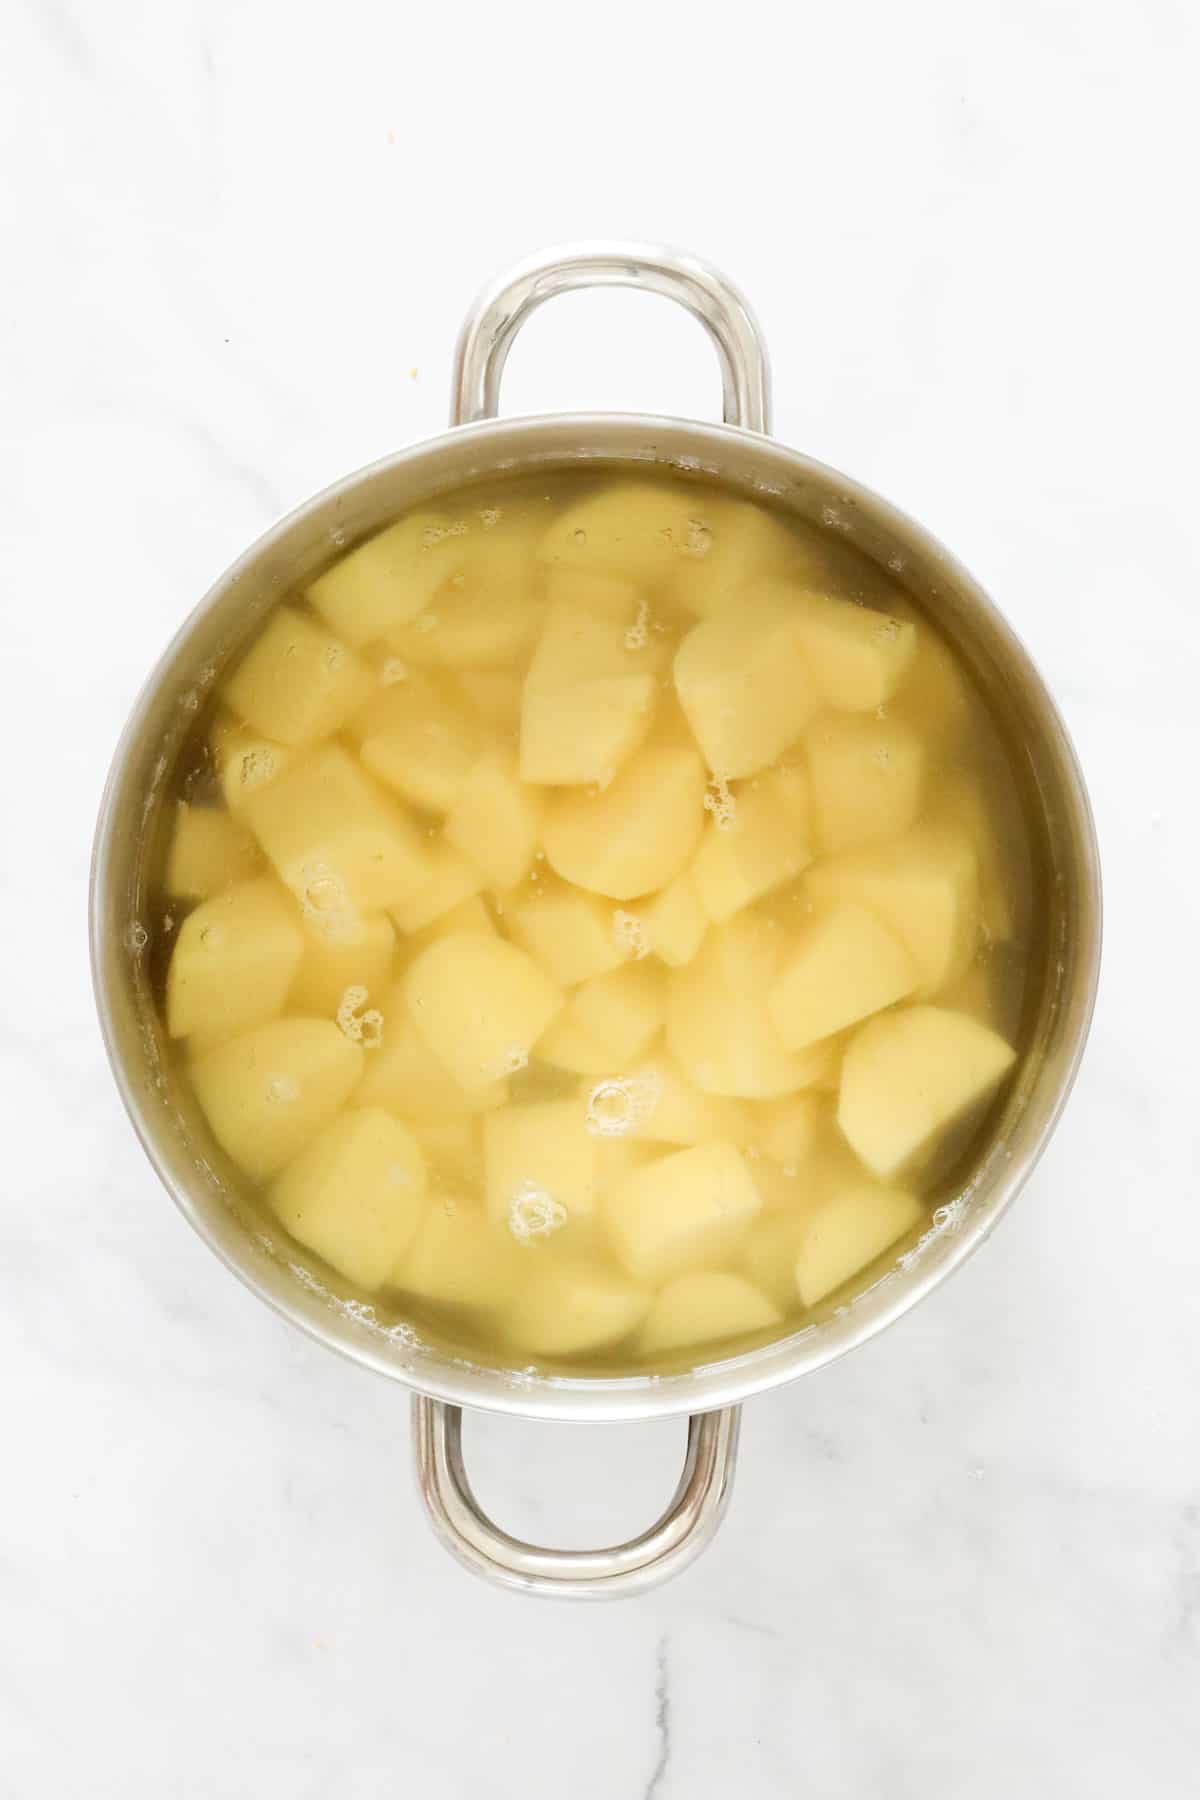 Potatoes and water in a pot.